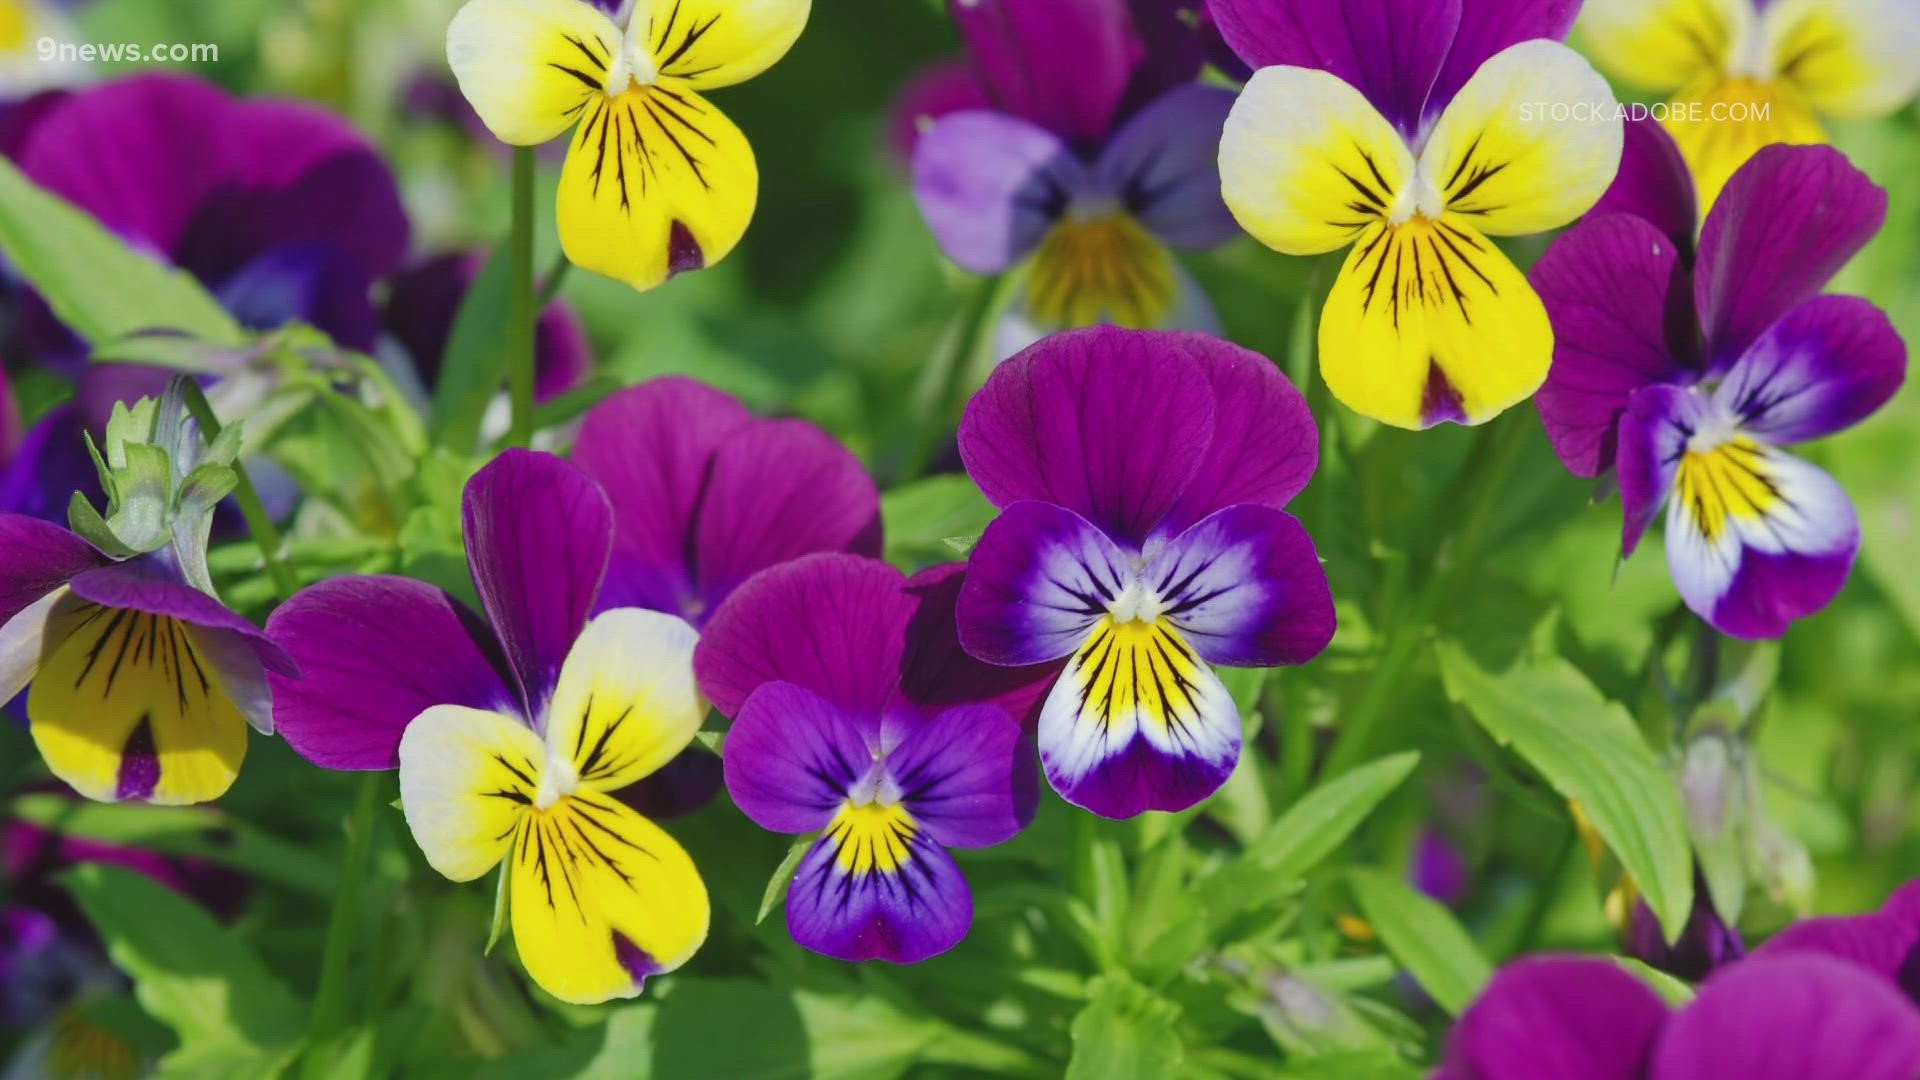 It may still be cold outside, but it's time to start thinking about your spring garden.